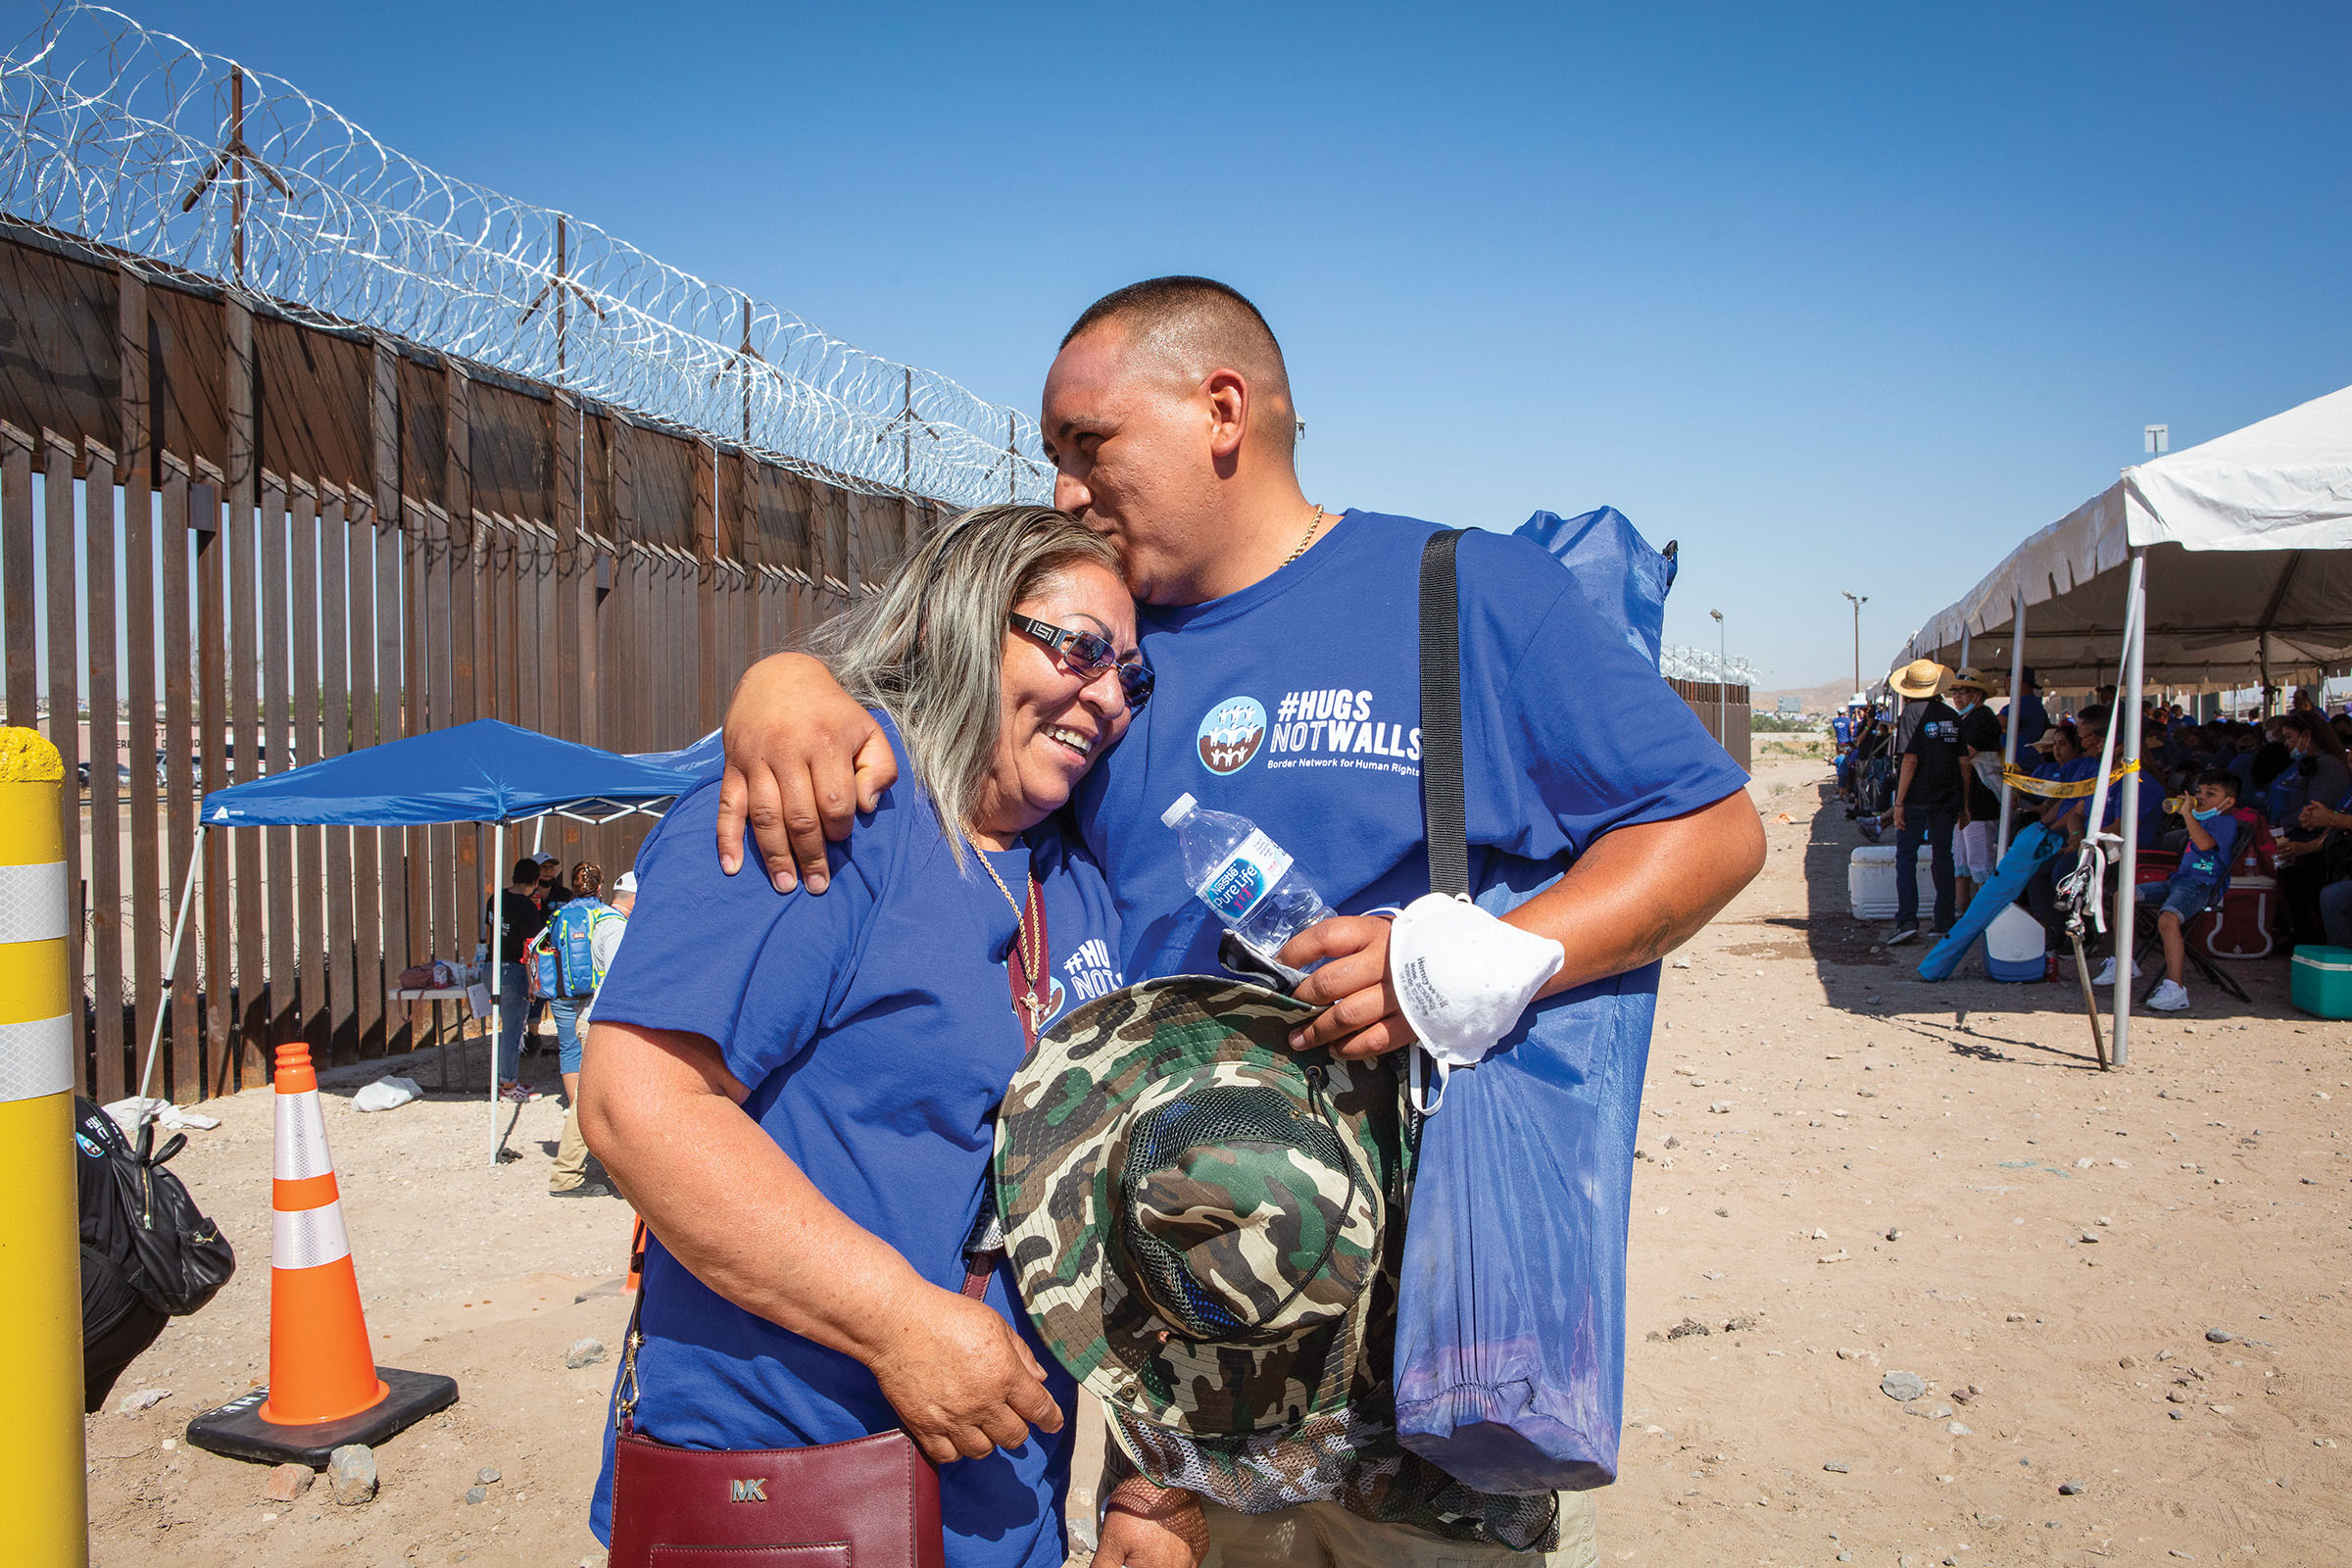 Two peopleembrace and kiss wearing blue shirts in front of a large steel border wall